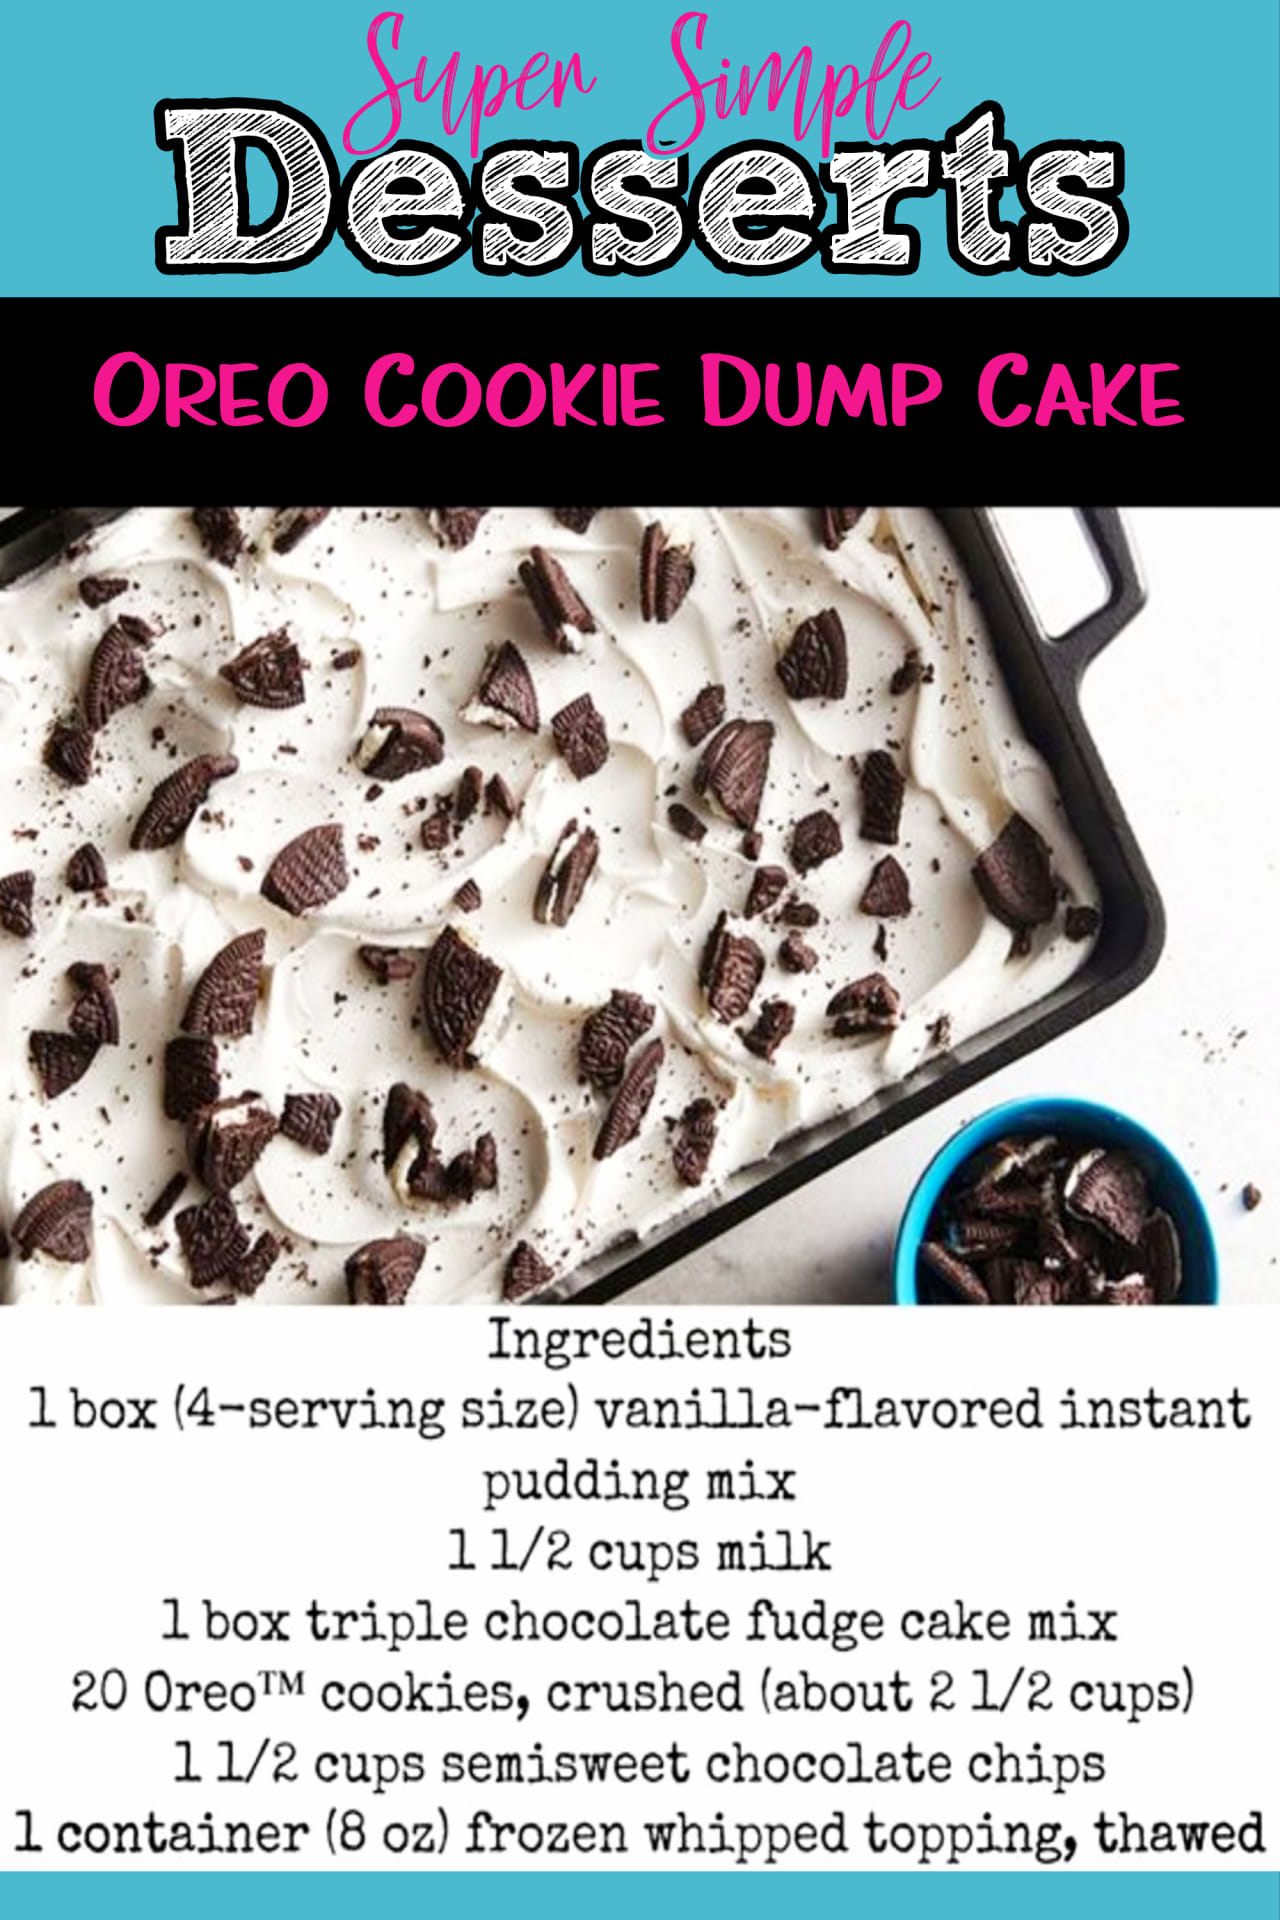 super simple desserts for a crowd - easy and simple Oreo dessert recipes - chocolate oreo dump cake recipe - easy chocolate dump cake recipes